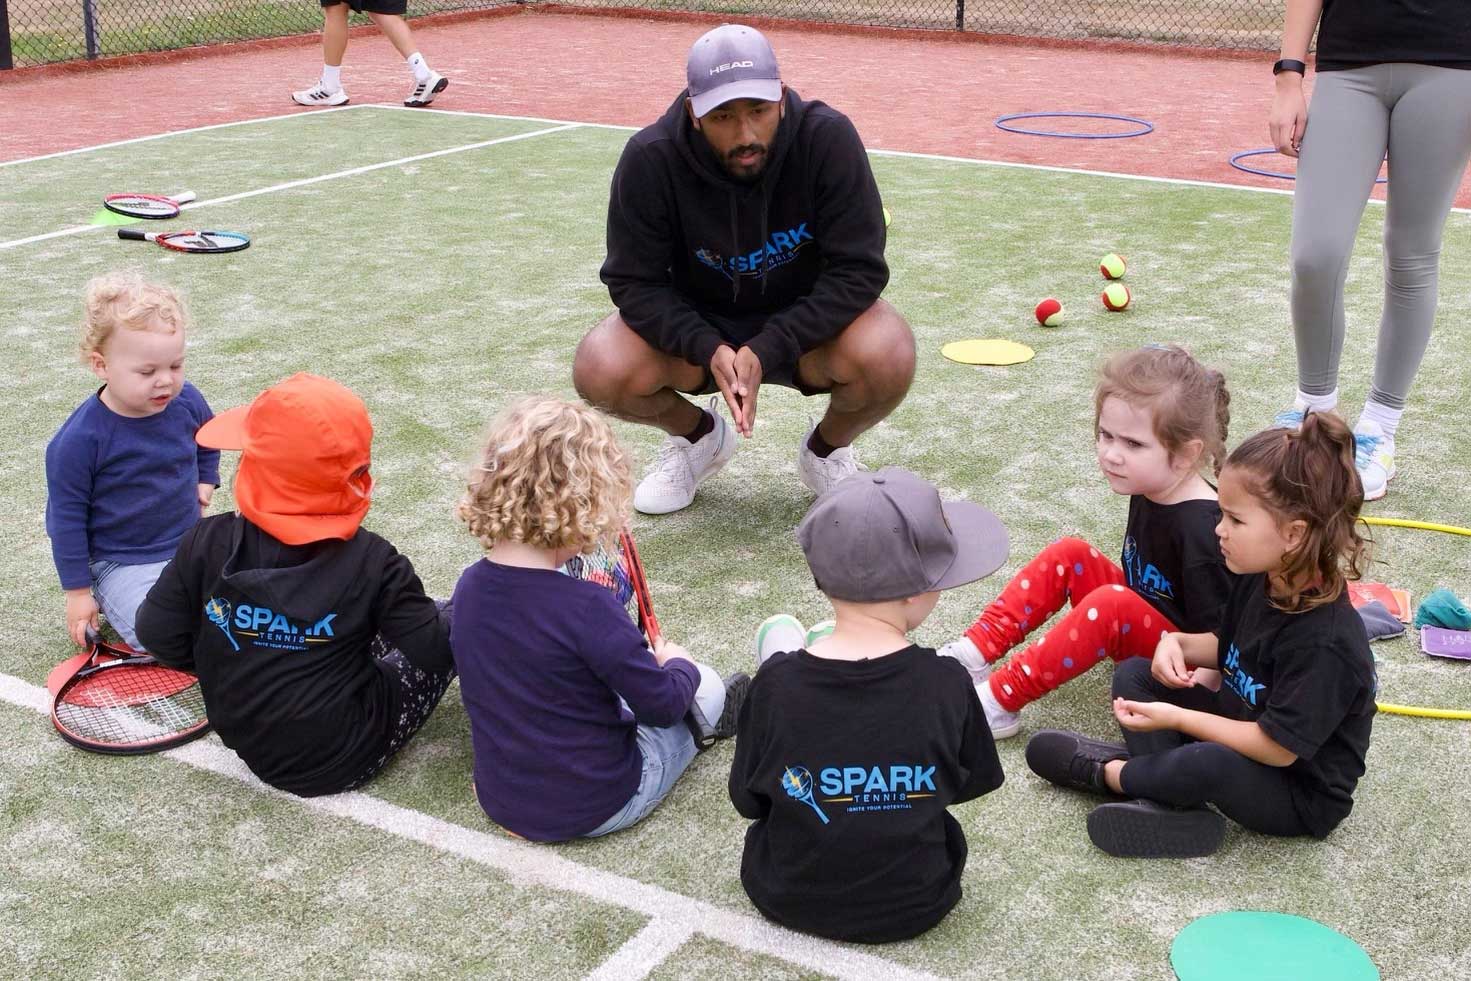 Free Tennis Lessons Melbourne for Kids & Adults - Gisborne and Eynesbury Tennis Club